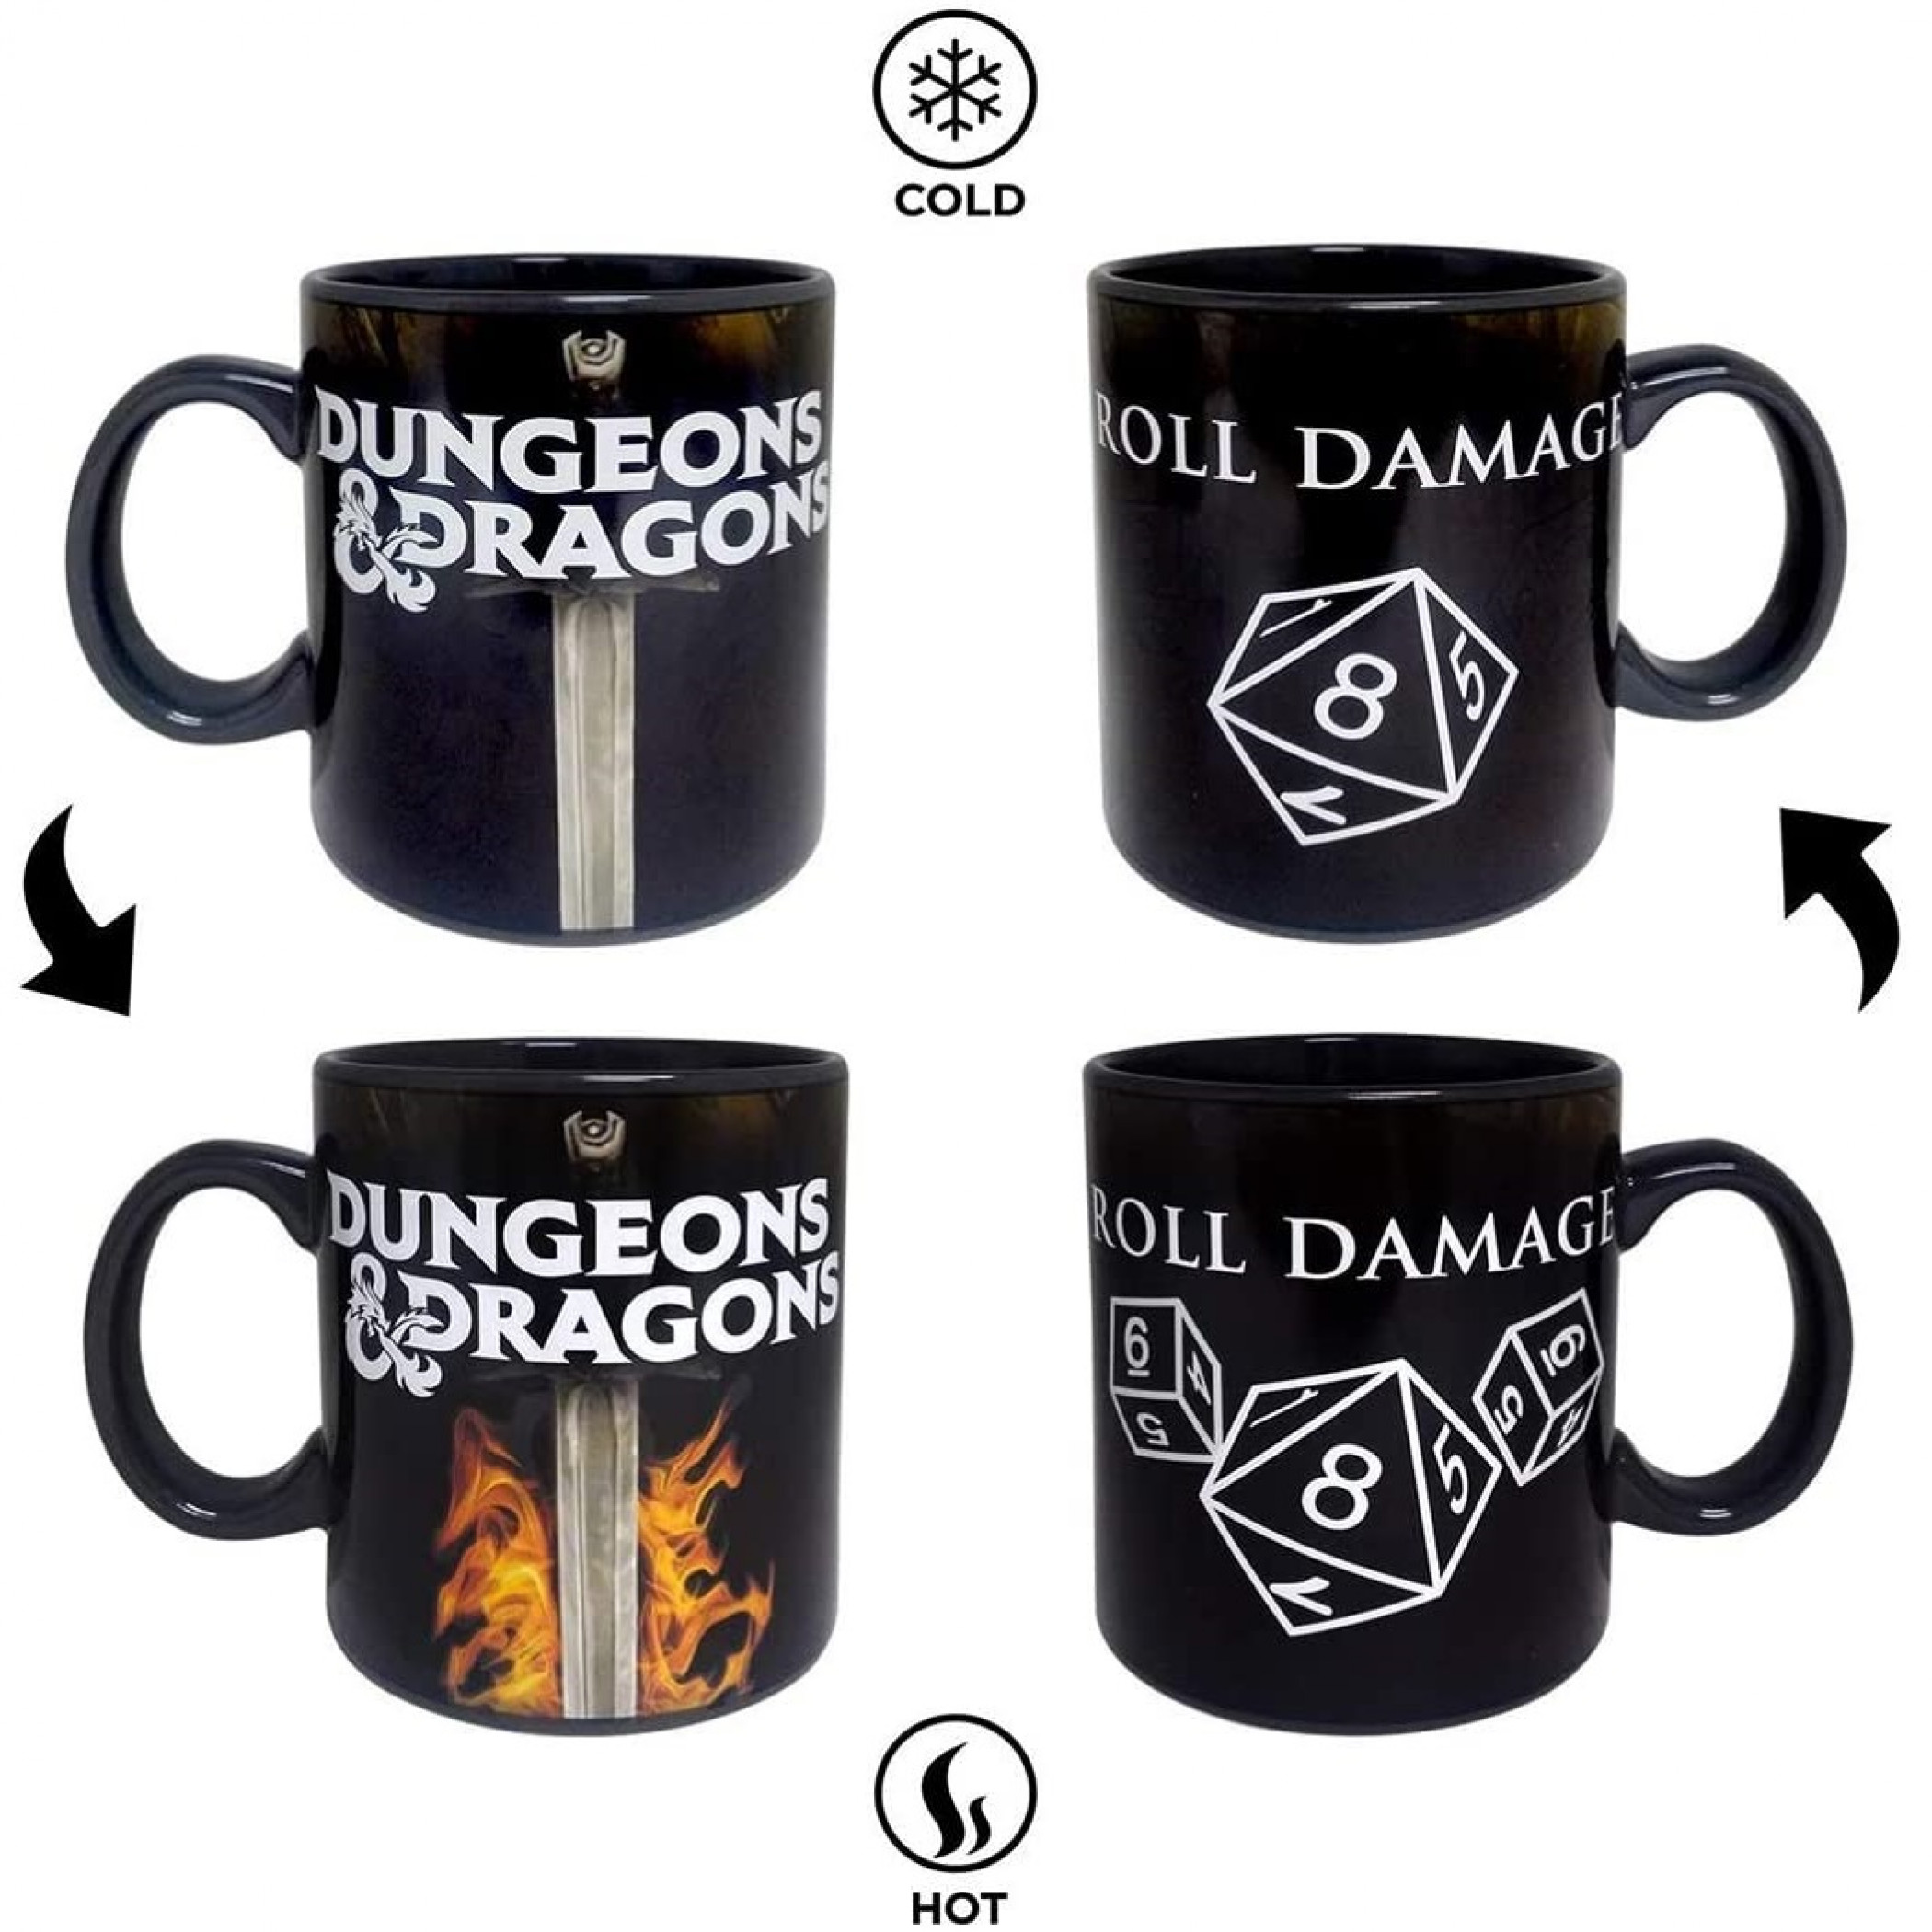 Dungeons and Dragons Roll Damage Color Change 16 Ounce Mug